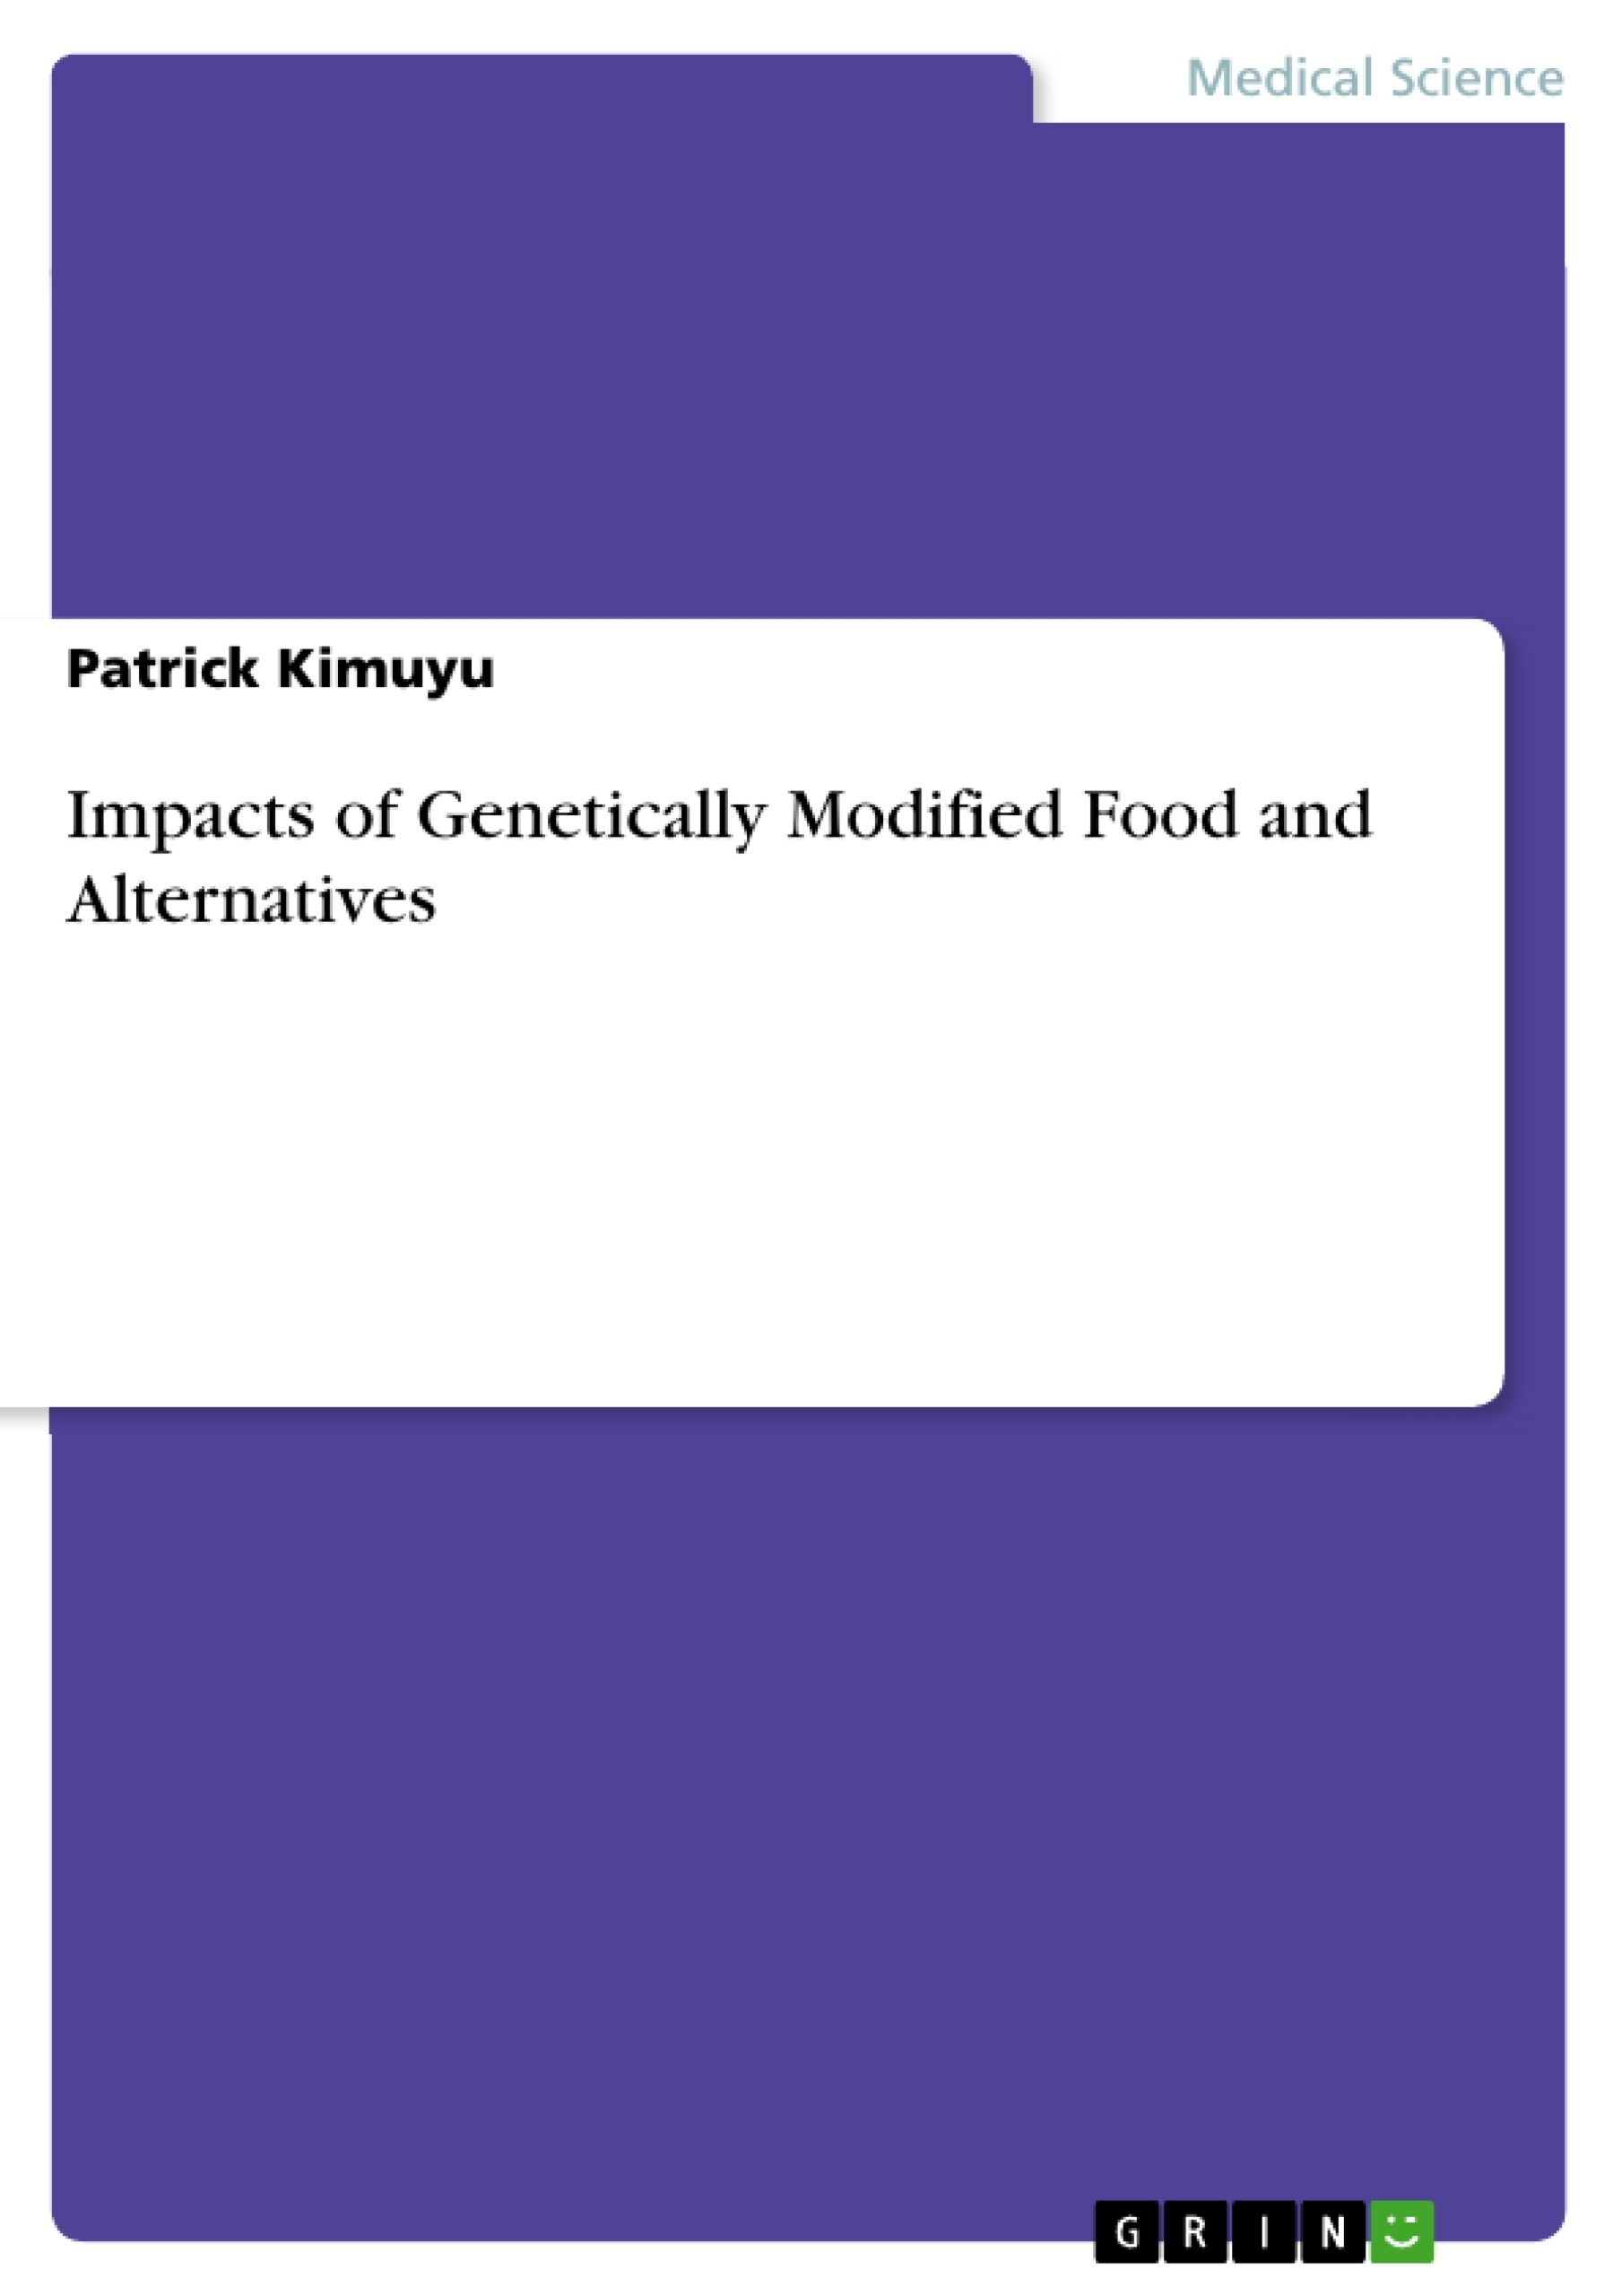 Título: Impacts of Genetically Modified Food and Alternatives